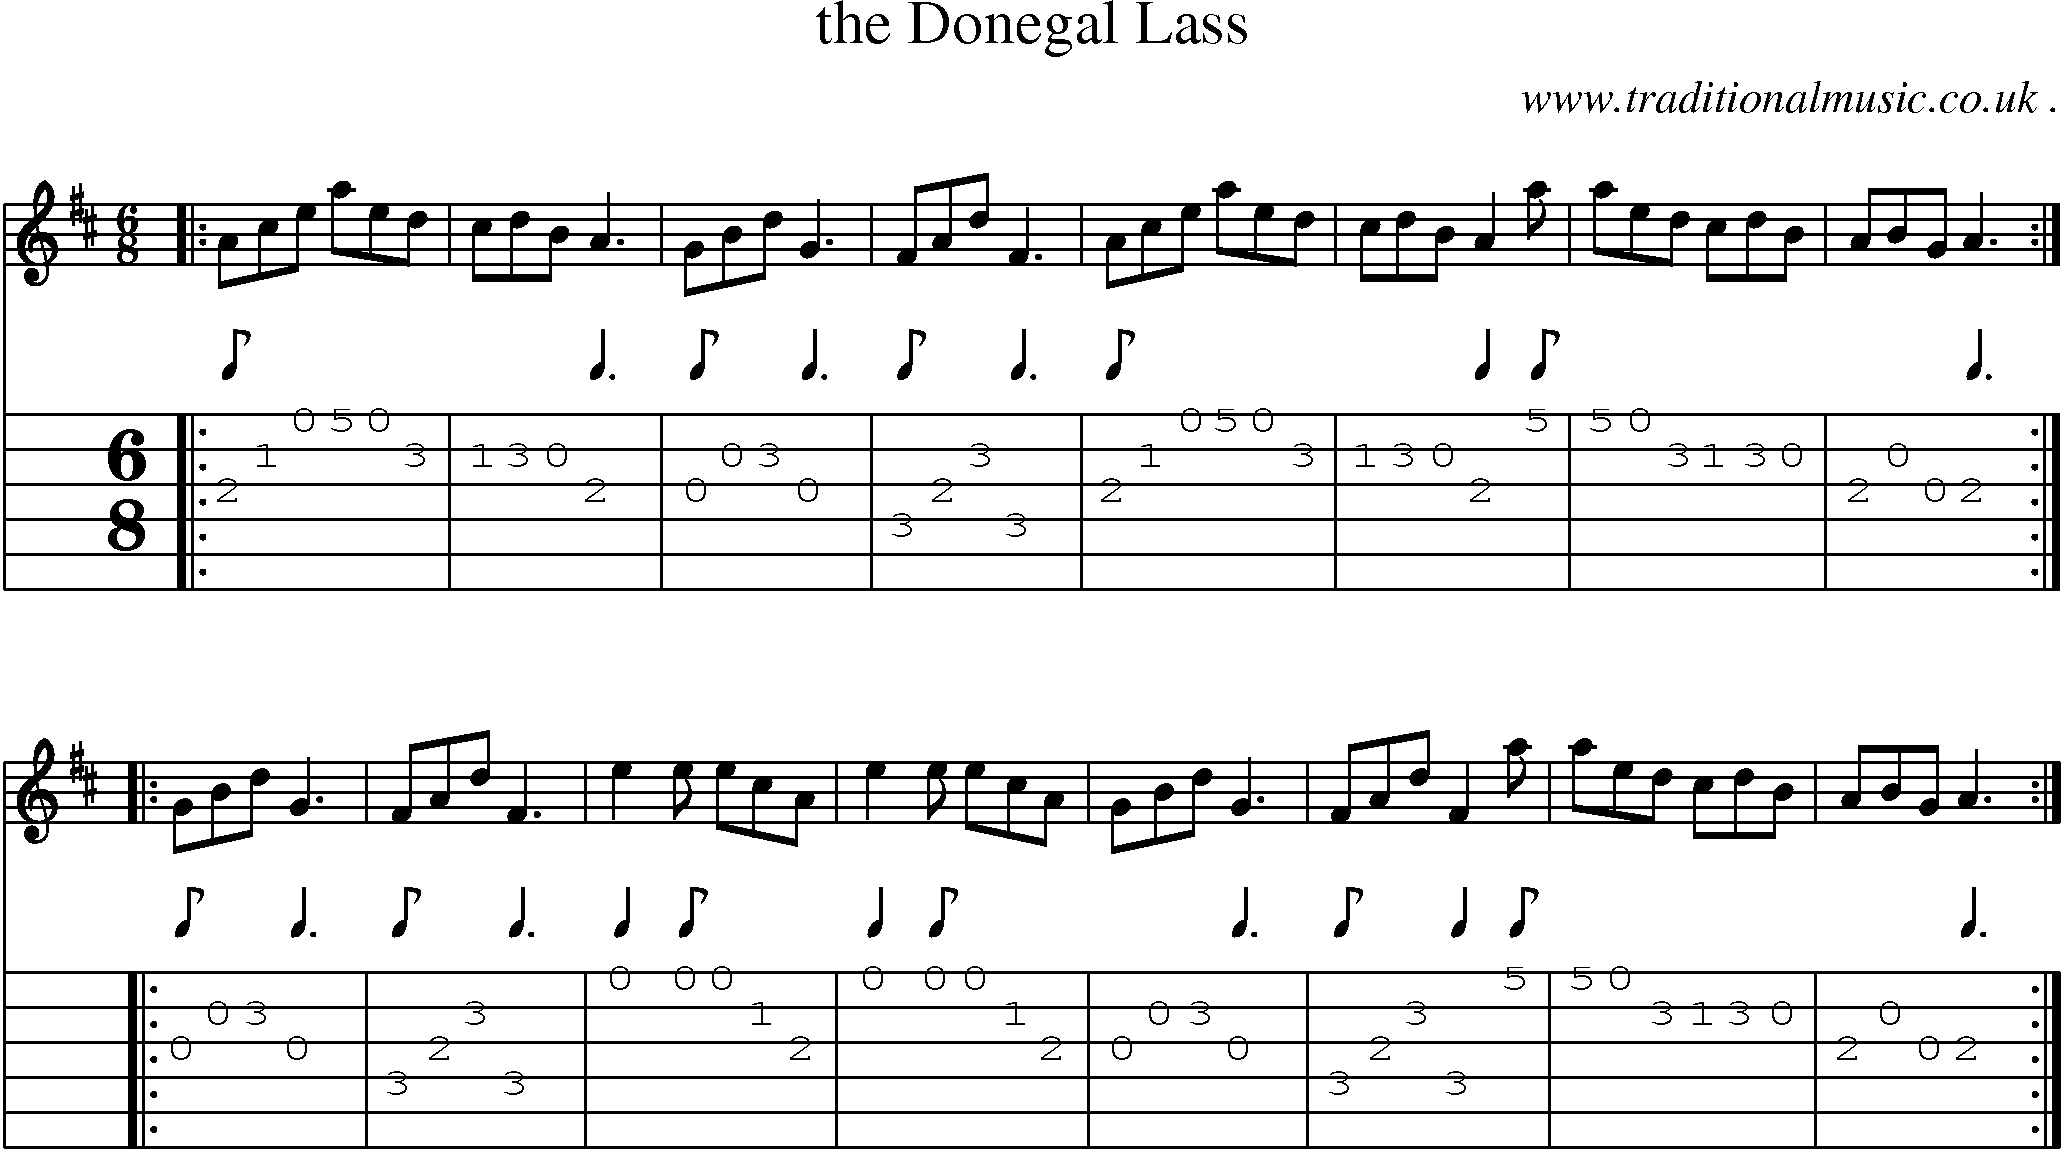 Sheet-music  score, Chords and Guitar Tabs for The Donegal Lass